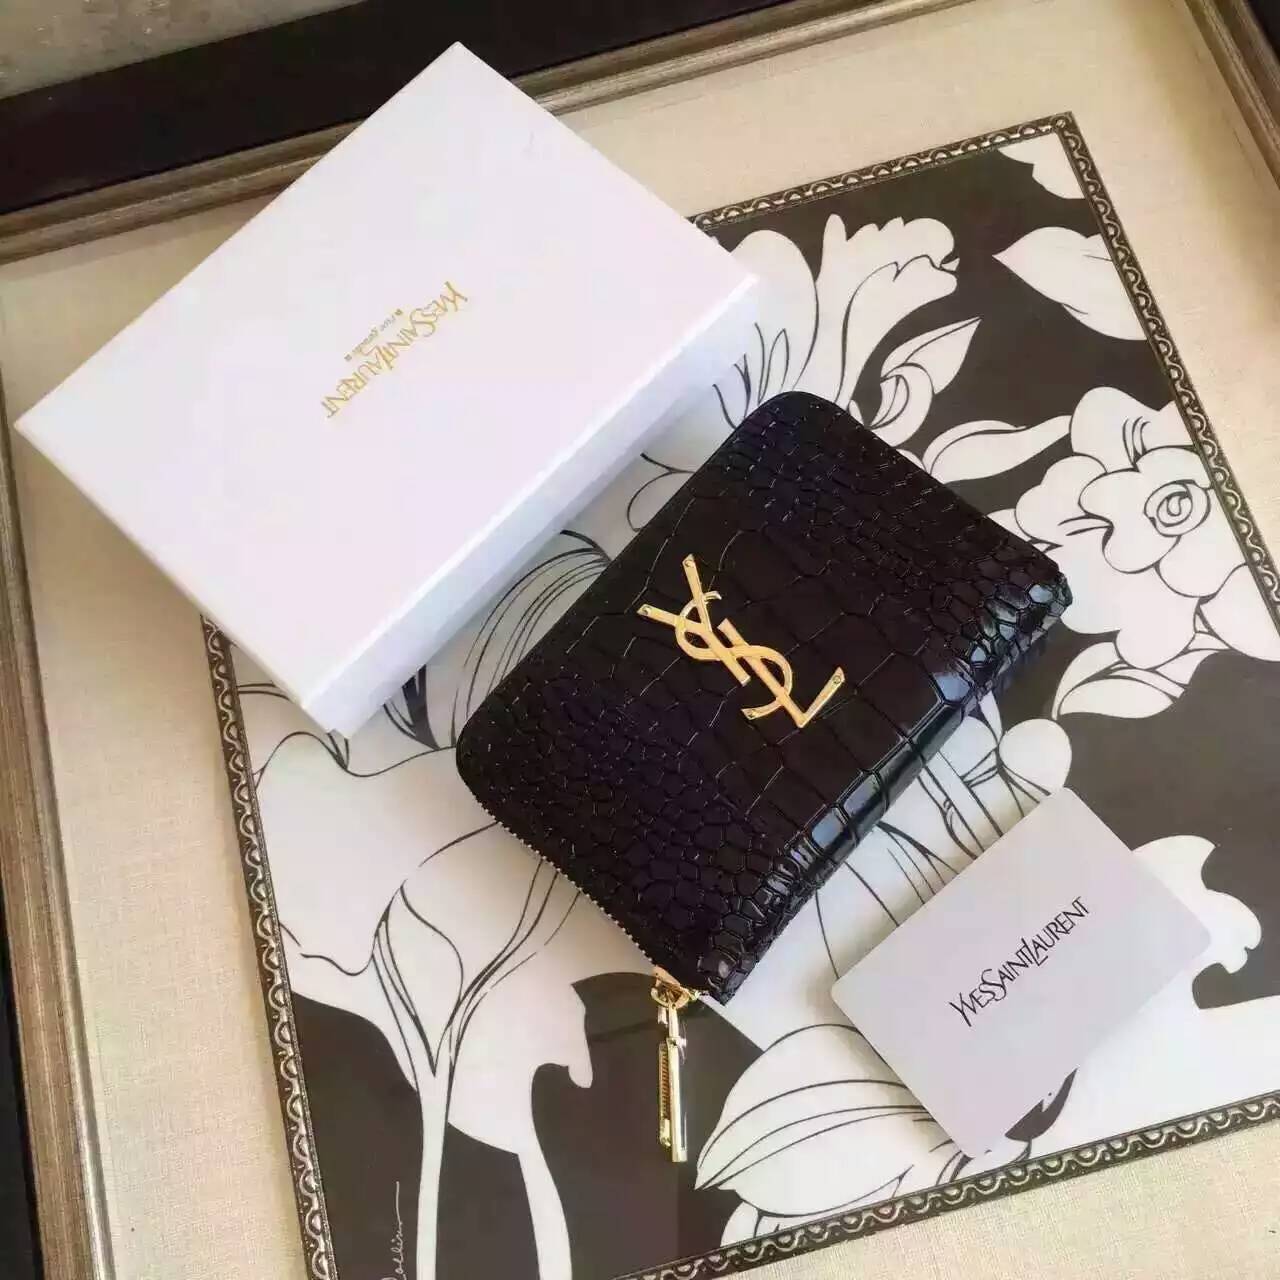 YSL Spring 2016 Collection Outlet-Saint Laurent Small Monogram Zip Around Wallet in Black Crocodile Embossed Leather